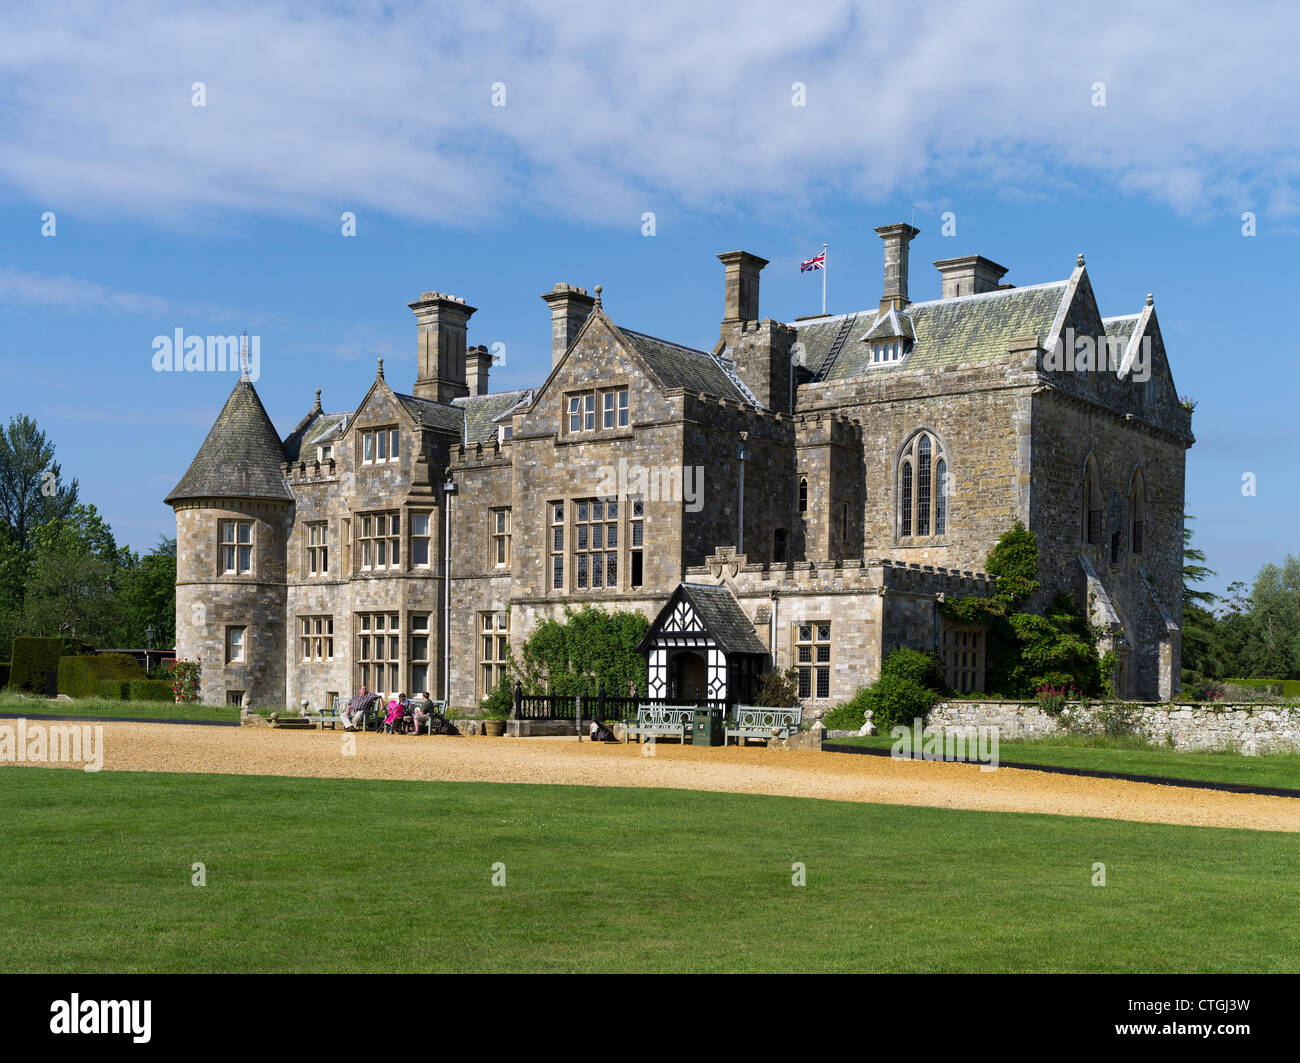 dh Home of Lord Montagu BEAULIEU PALACE HAMPSHIRE UK Mansion house estate new forest uk country stately Stock Photo